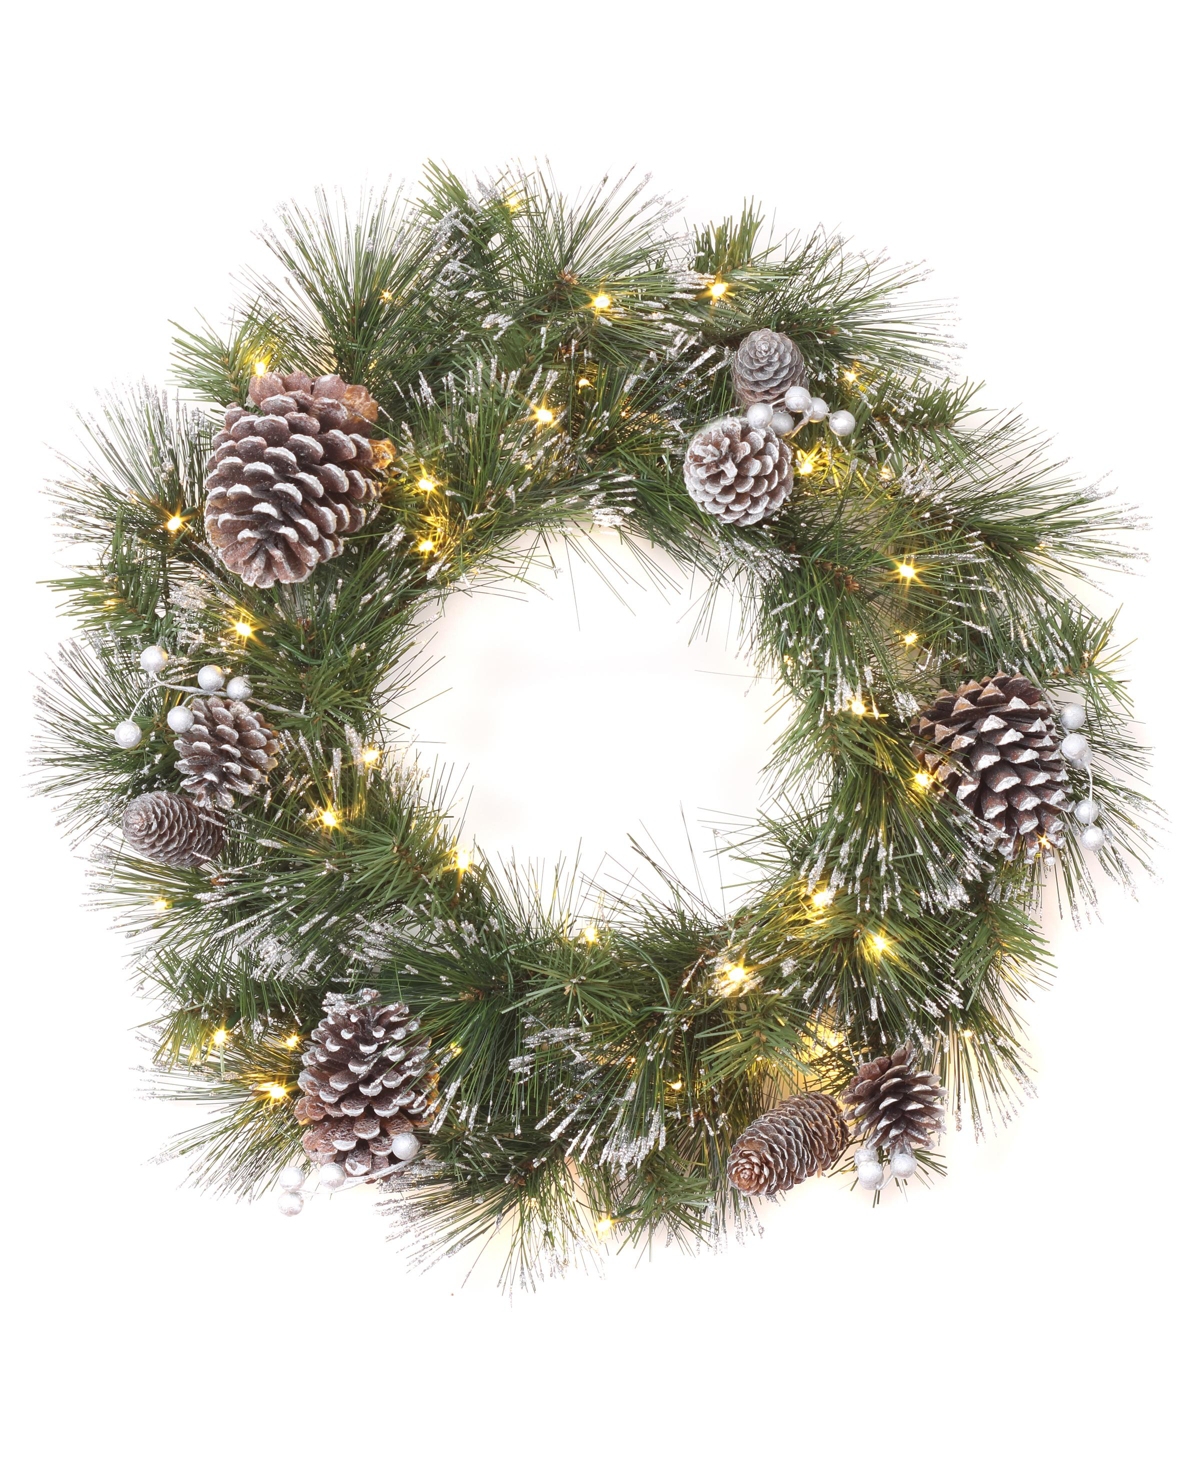 24" Whitter Pine Wreath with Led Lights - Green